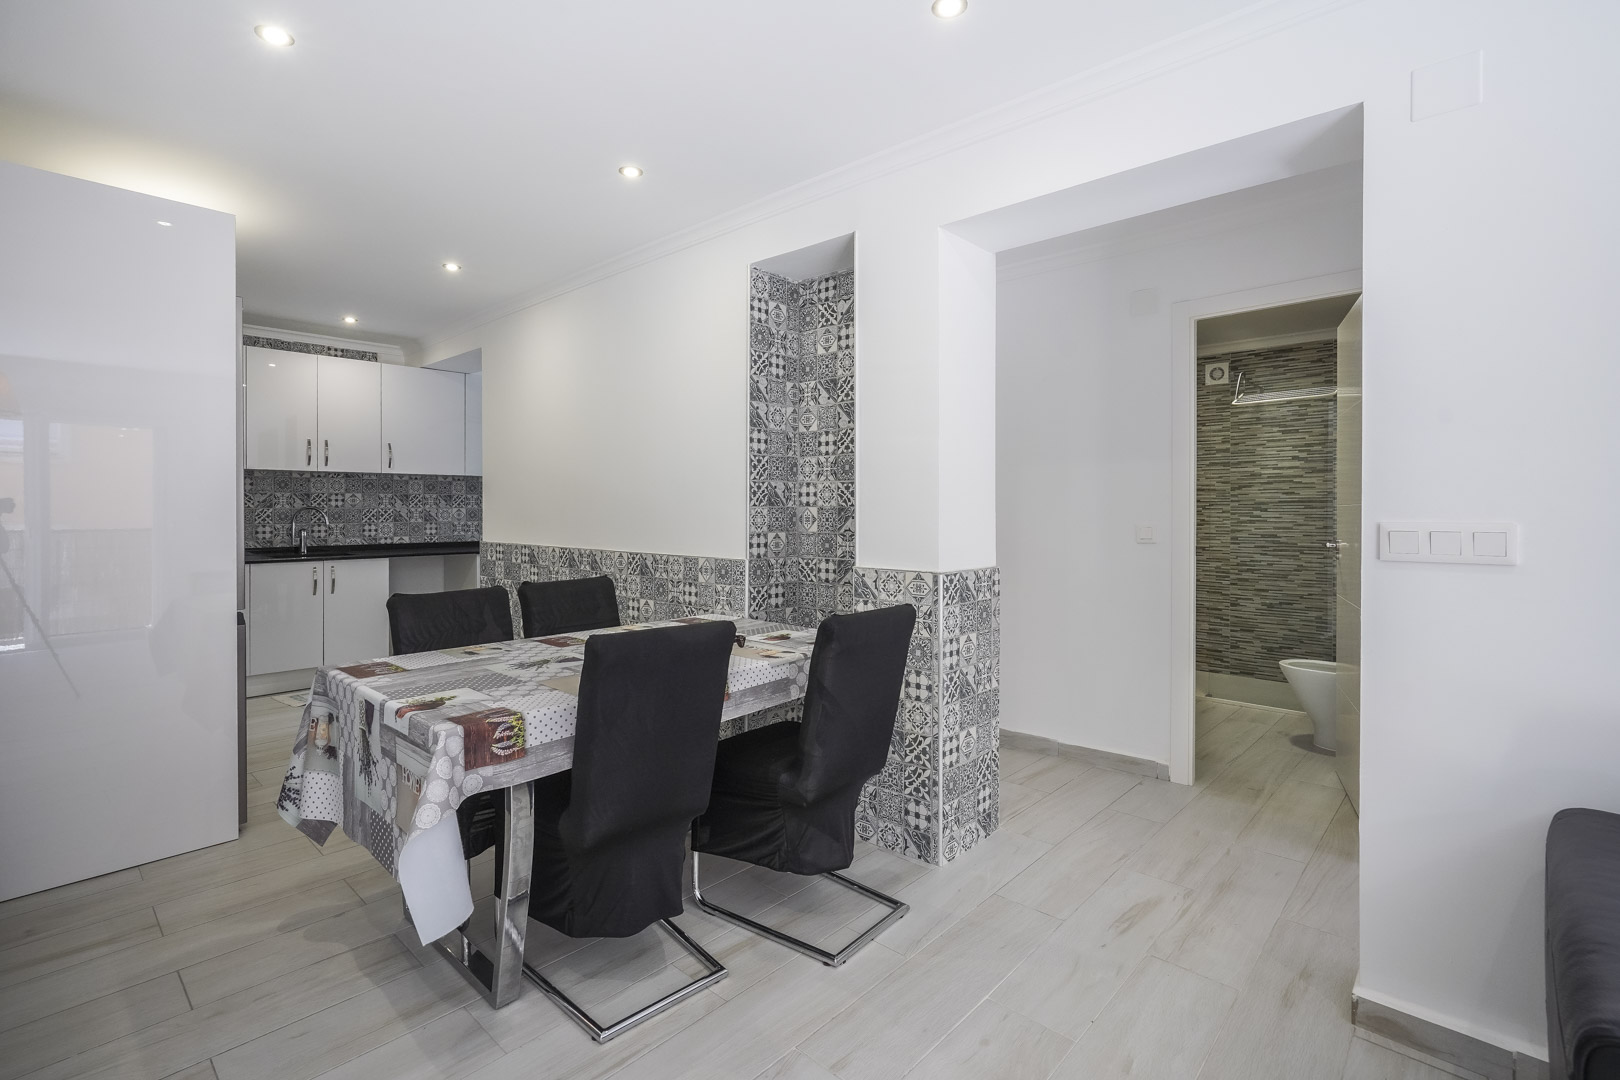 Renovated apartment in the center of Javea
bp